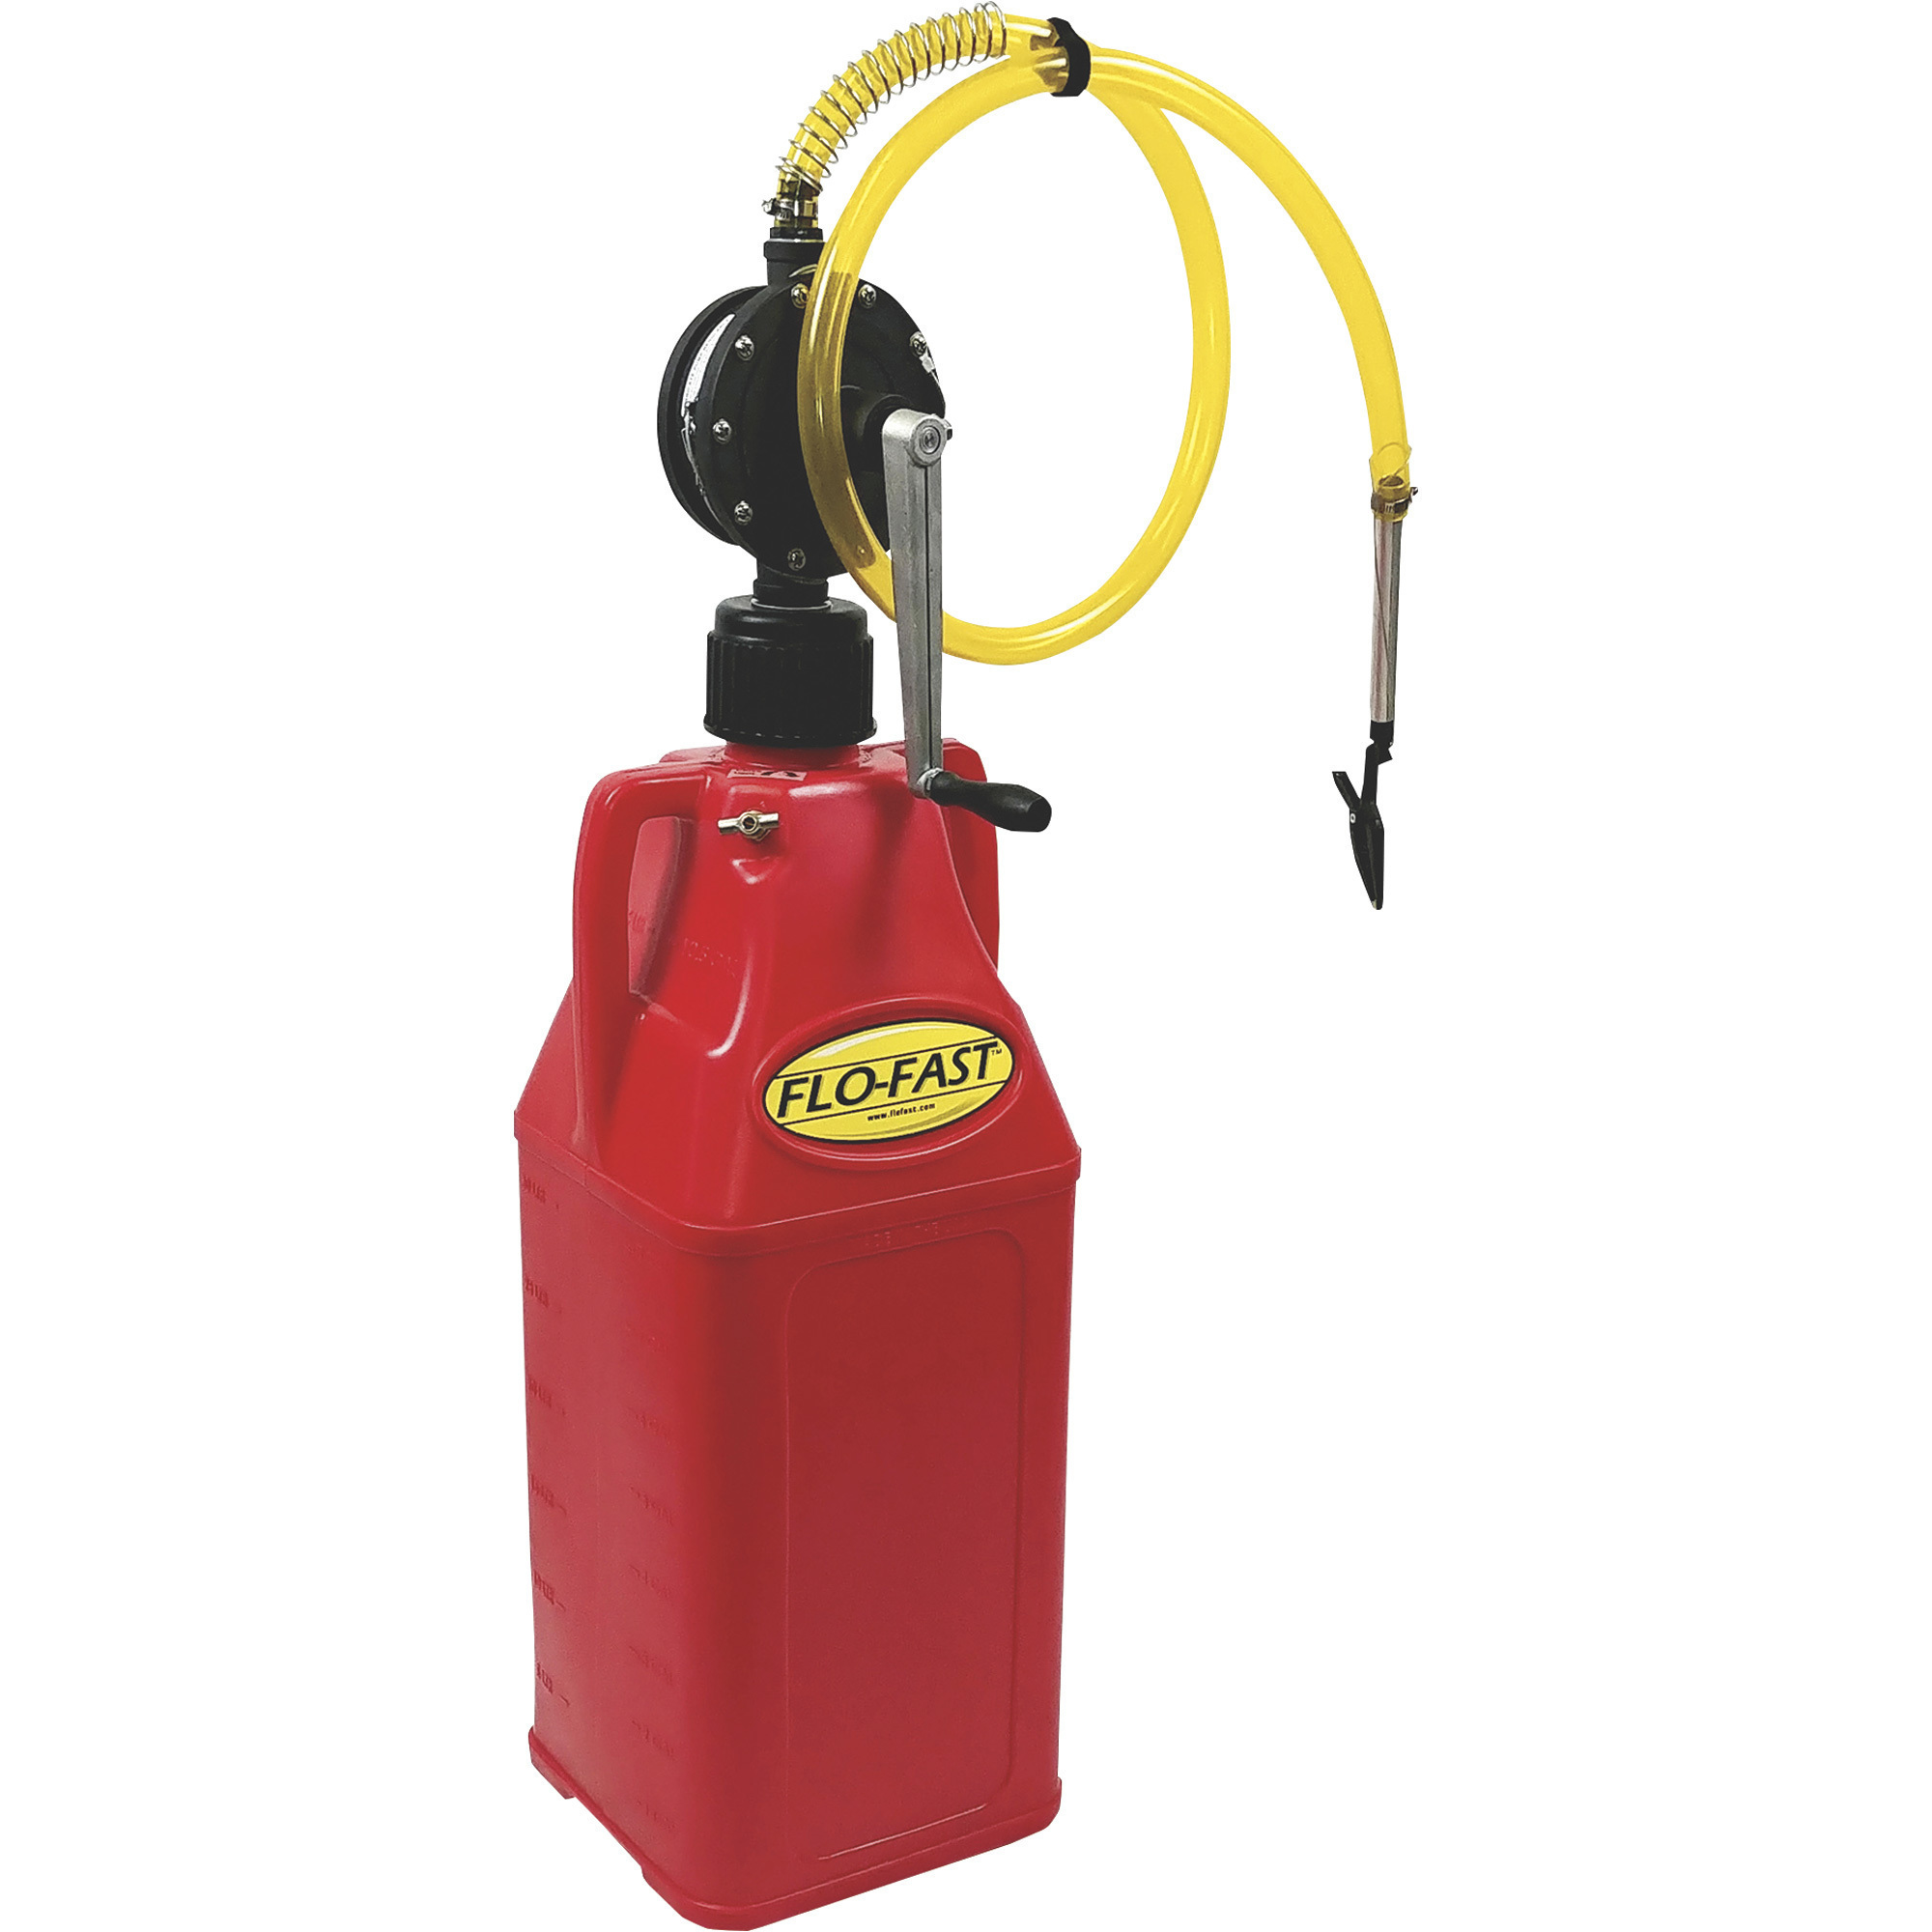 FLO-FAST Container With Pump, 10.5-Gallon, Red, For Gasoline, Model 30050-R